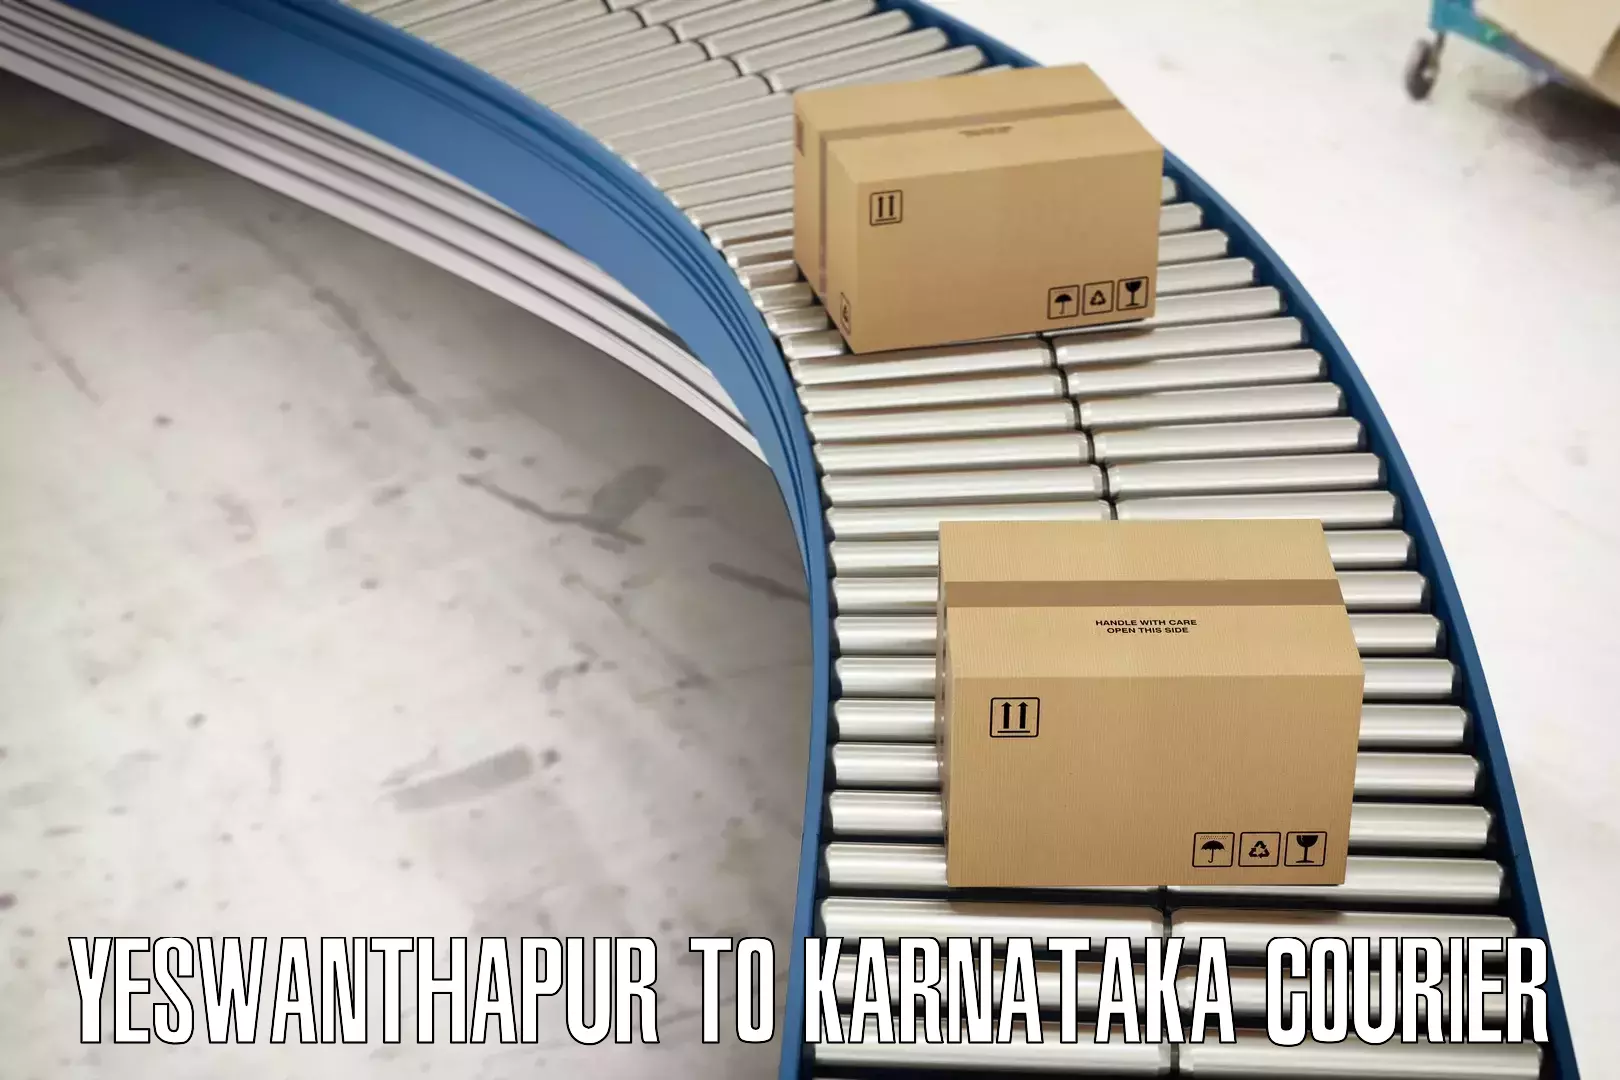 State-of-the-art courier technology Yeswanthapur to Chikkaballapur